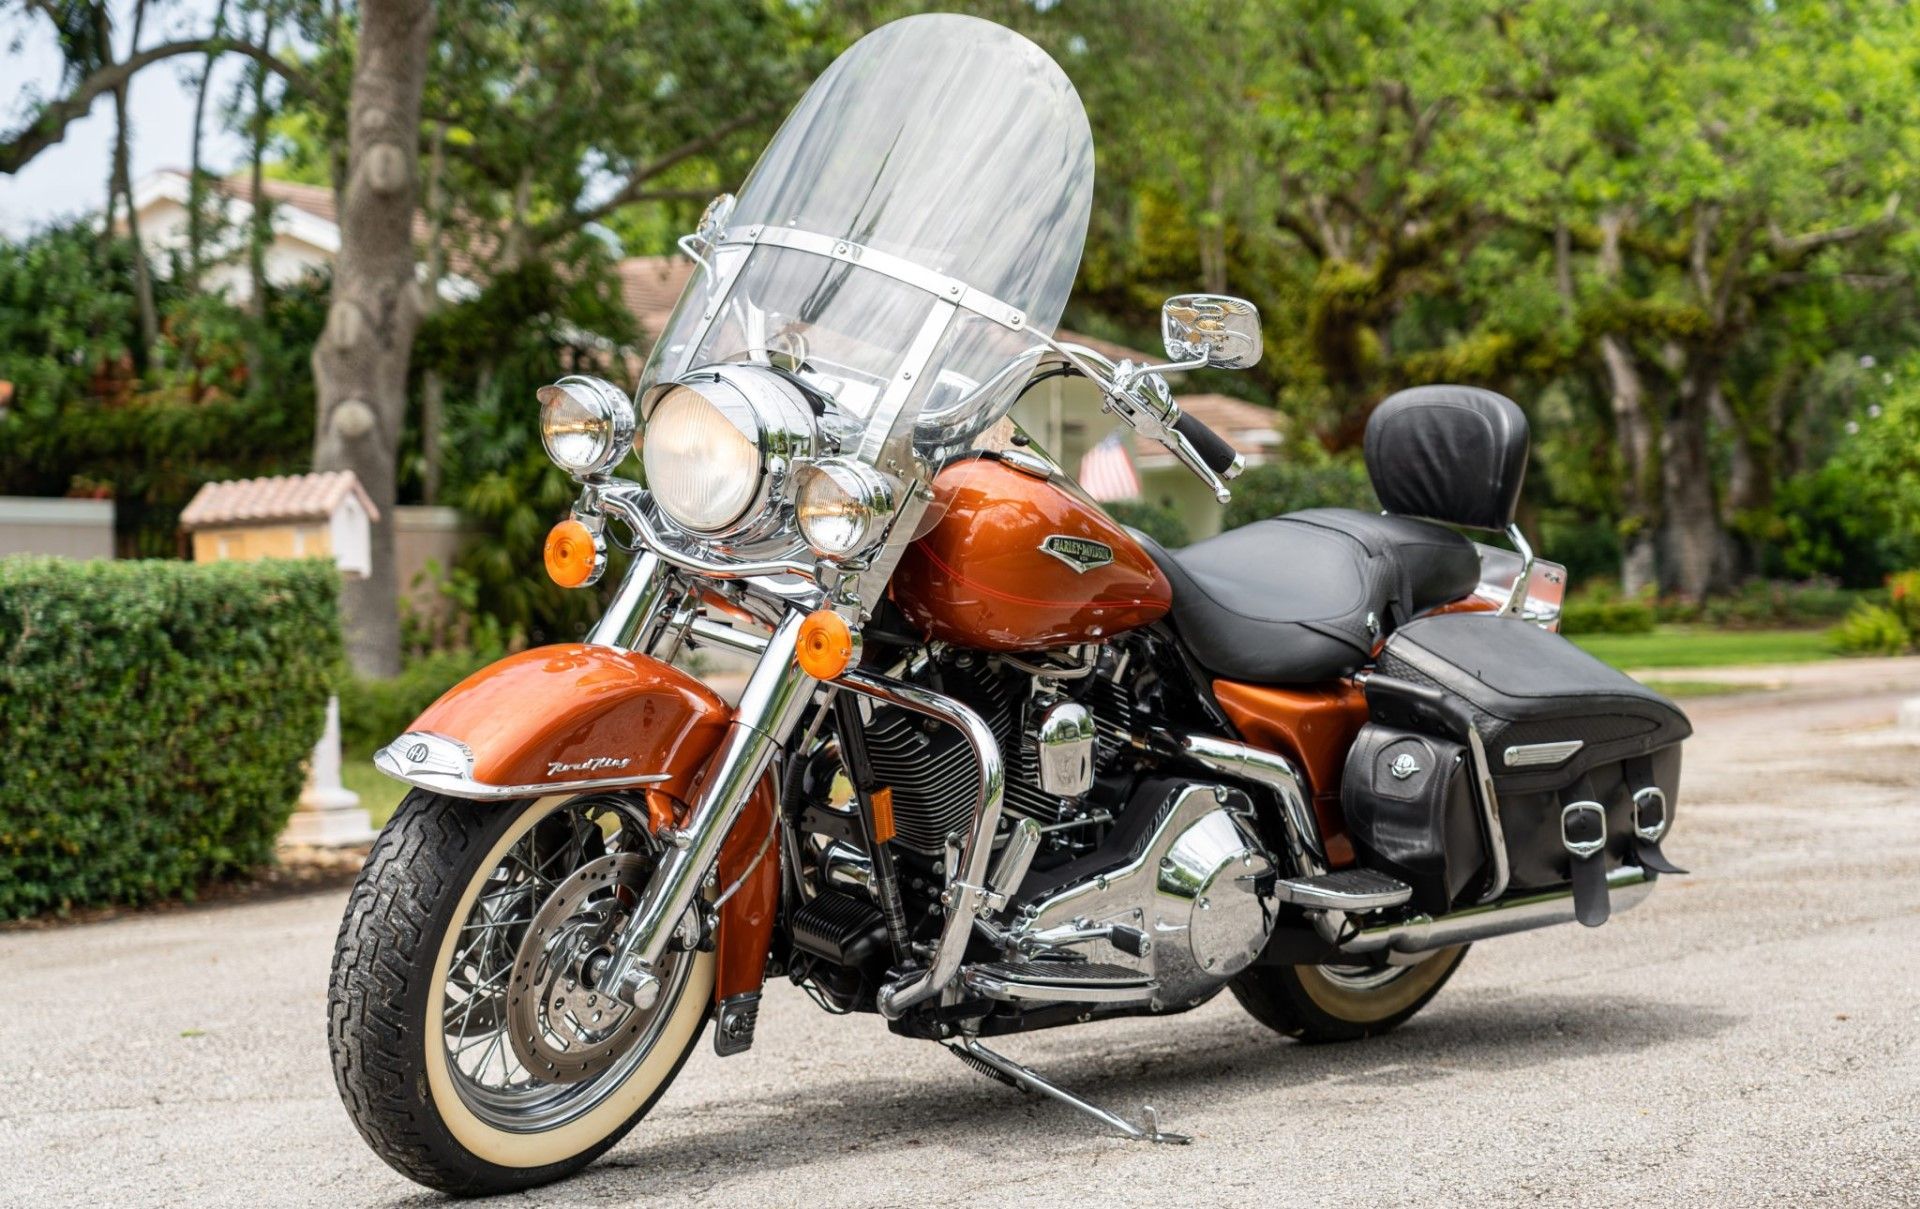 2000 Harley-Davidson Road King Classic front third quarter view